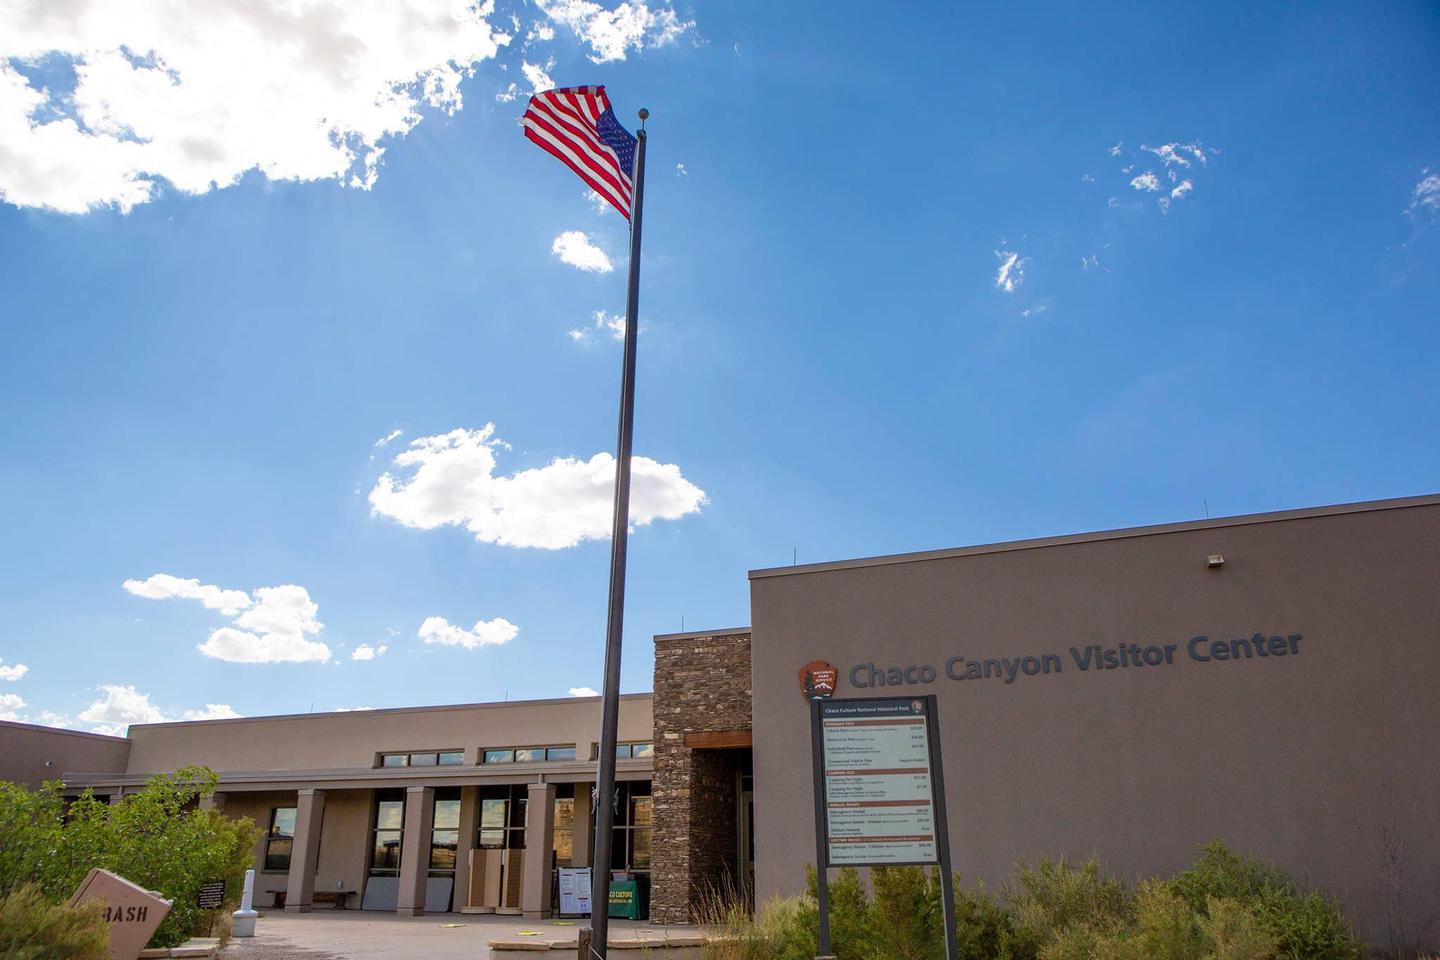 Chaco Canyon Visitor Center (Summer)The Visitor Center is open 9:00am-5:00pm.